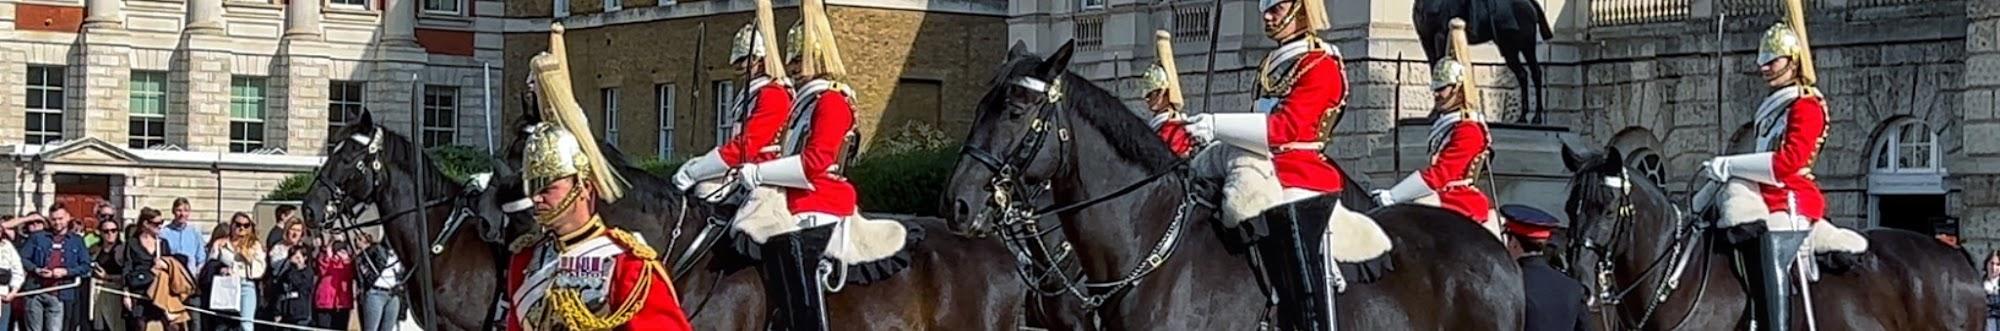 The King's Guards and Horse UK